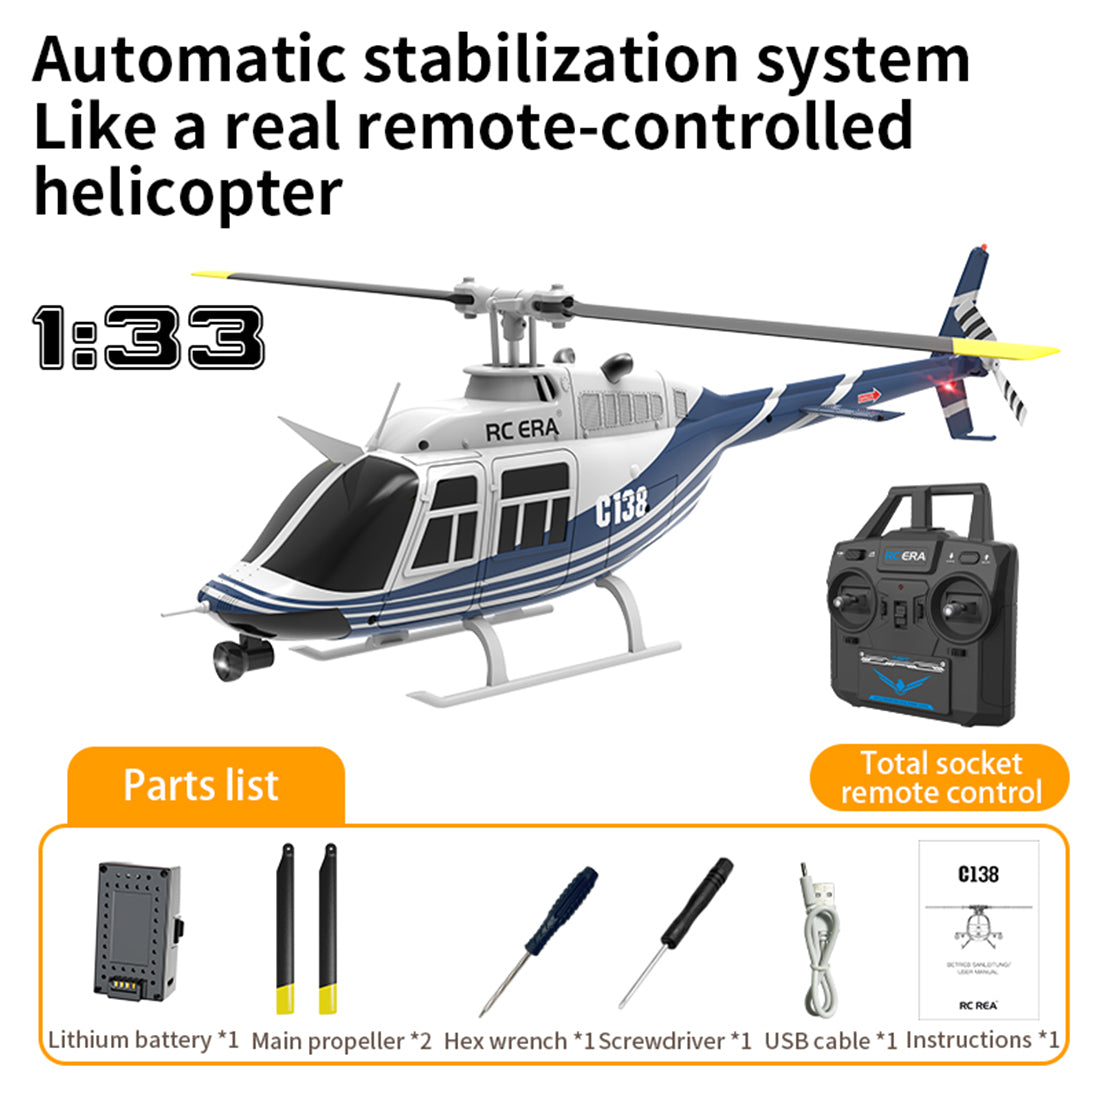 C138 1/30 Scale BELL 206 Helicopter 2.4G 6CH Single-Rotor Gyroscopic Flying Aircraft Model-razordon